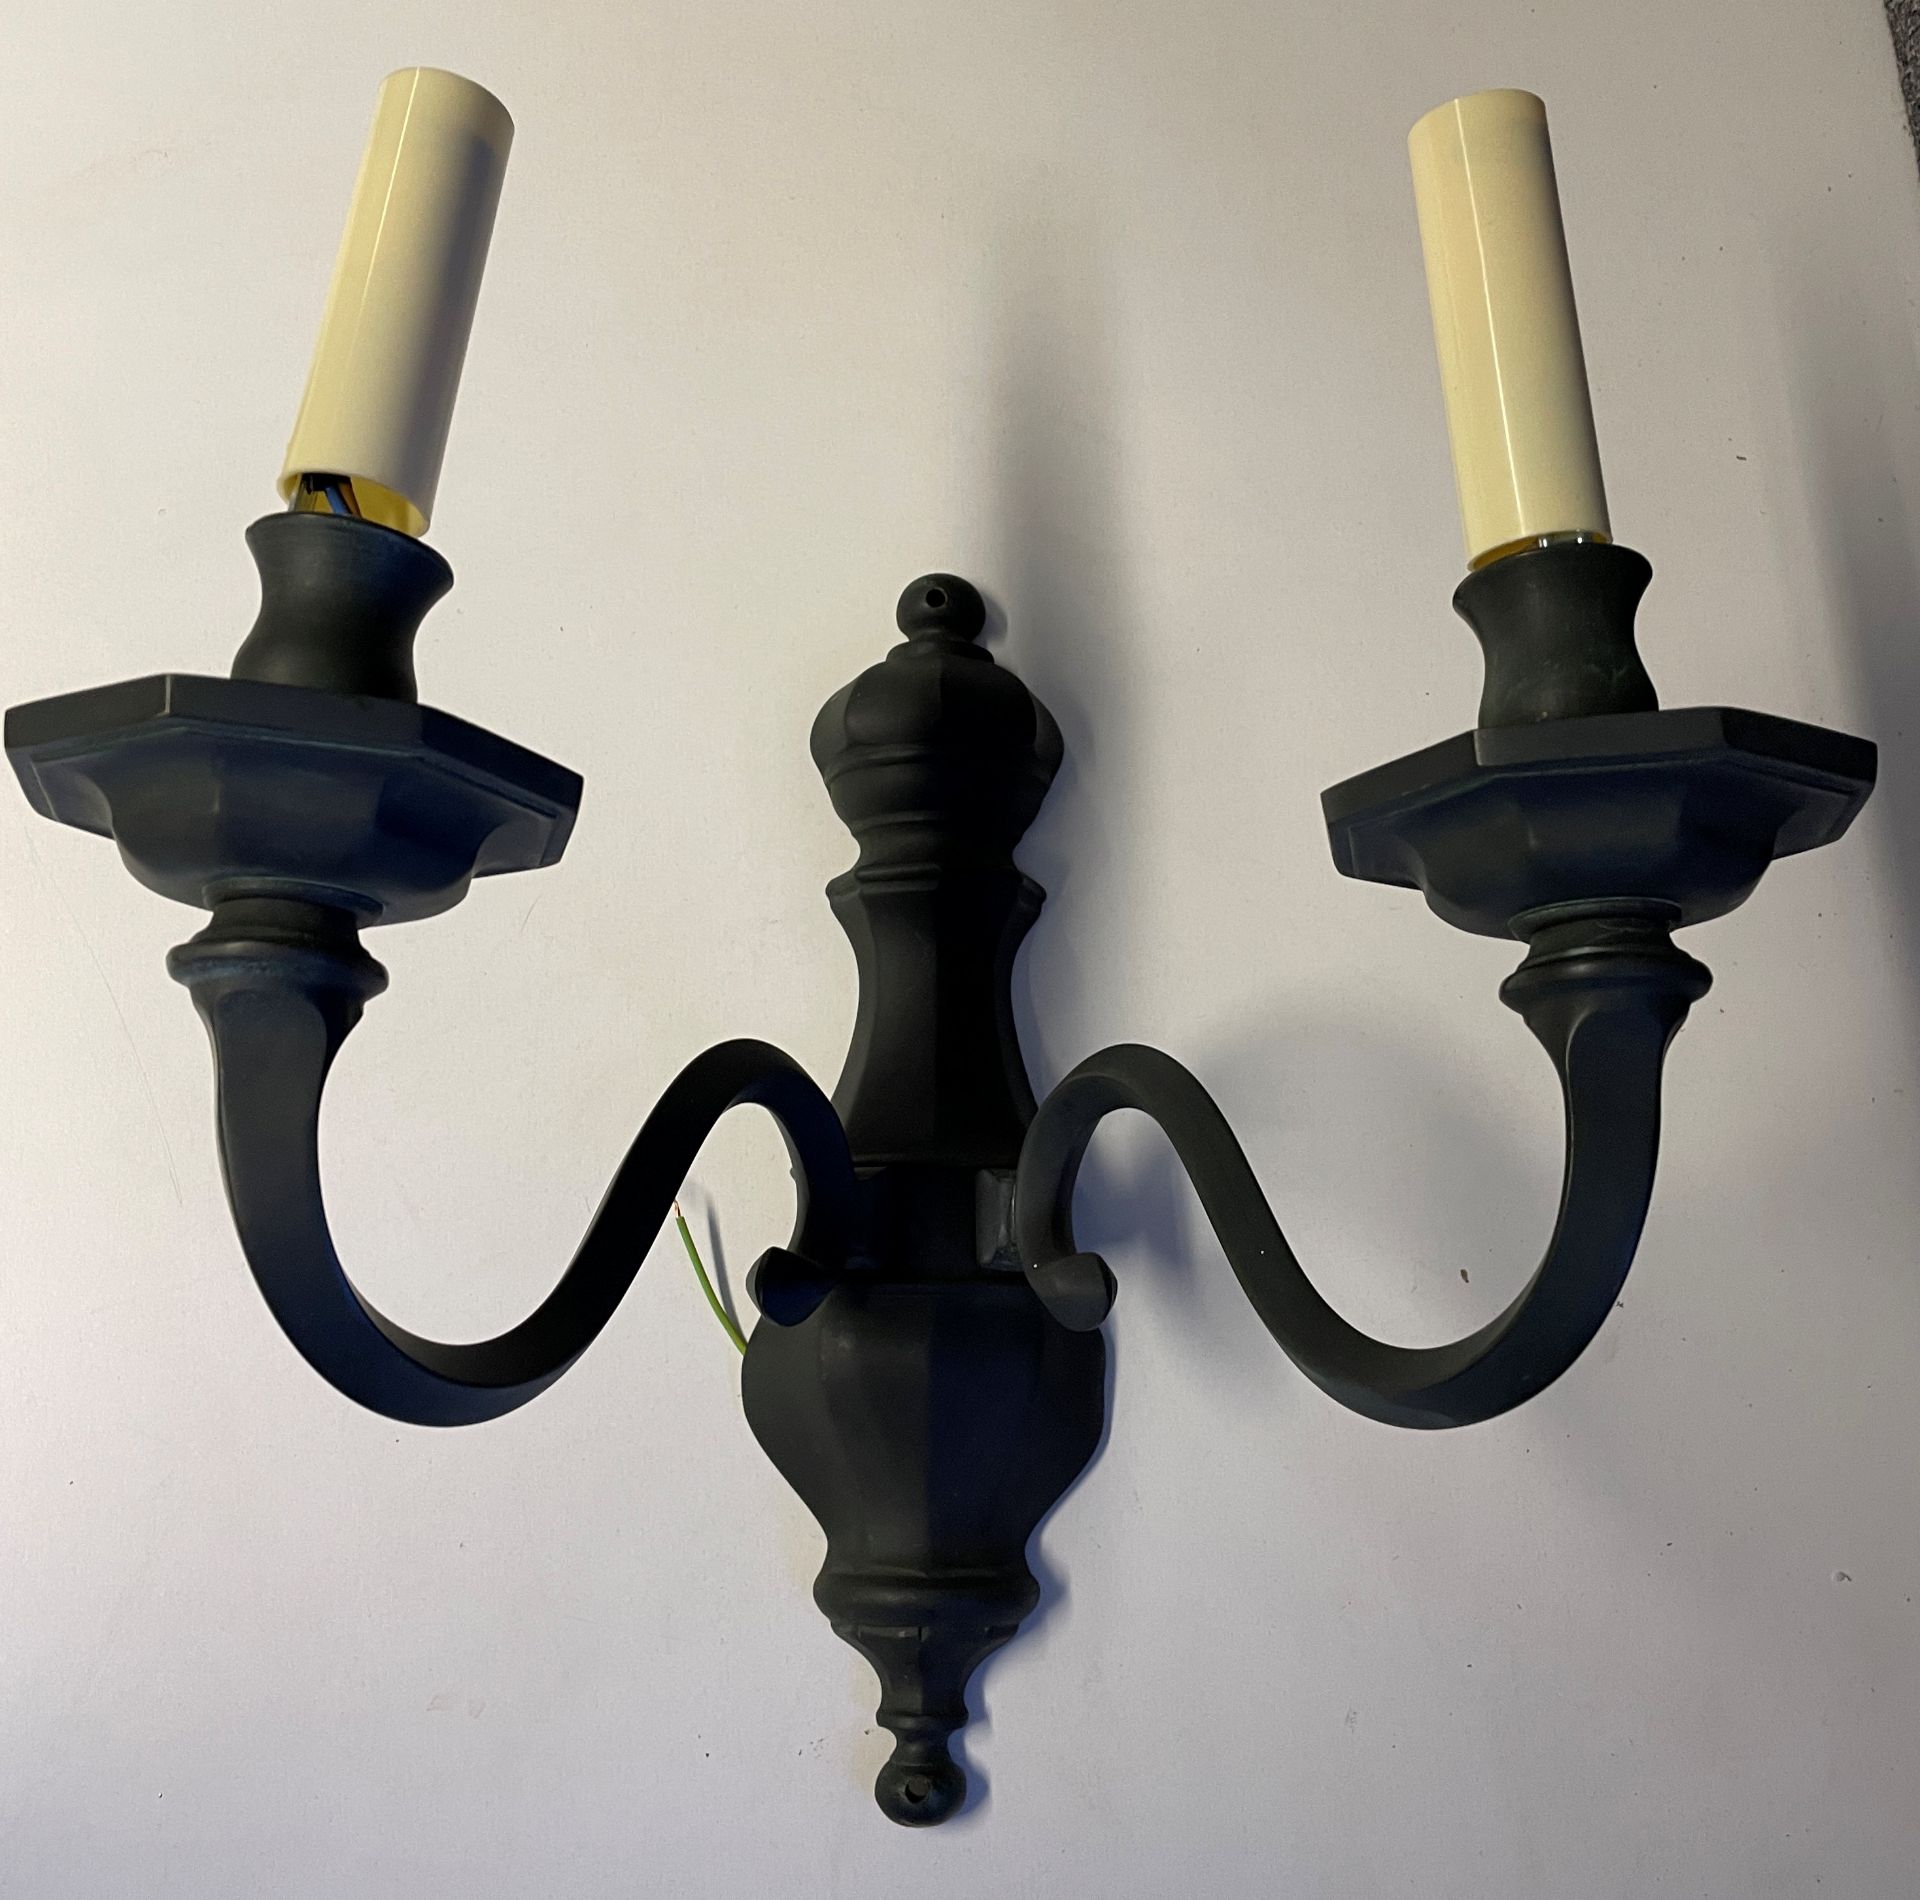 1 x Chelsom Wall Sconce in Antique Green with 2 Arms Arm to arm 34cm x Height 34cm - designed exclu